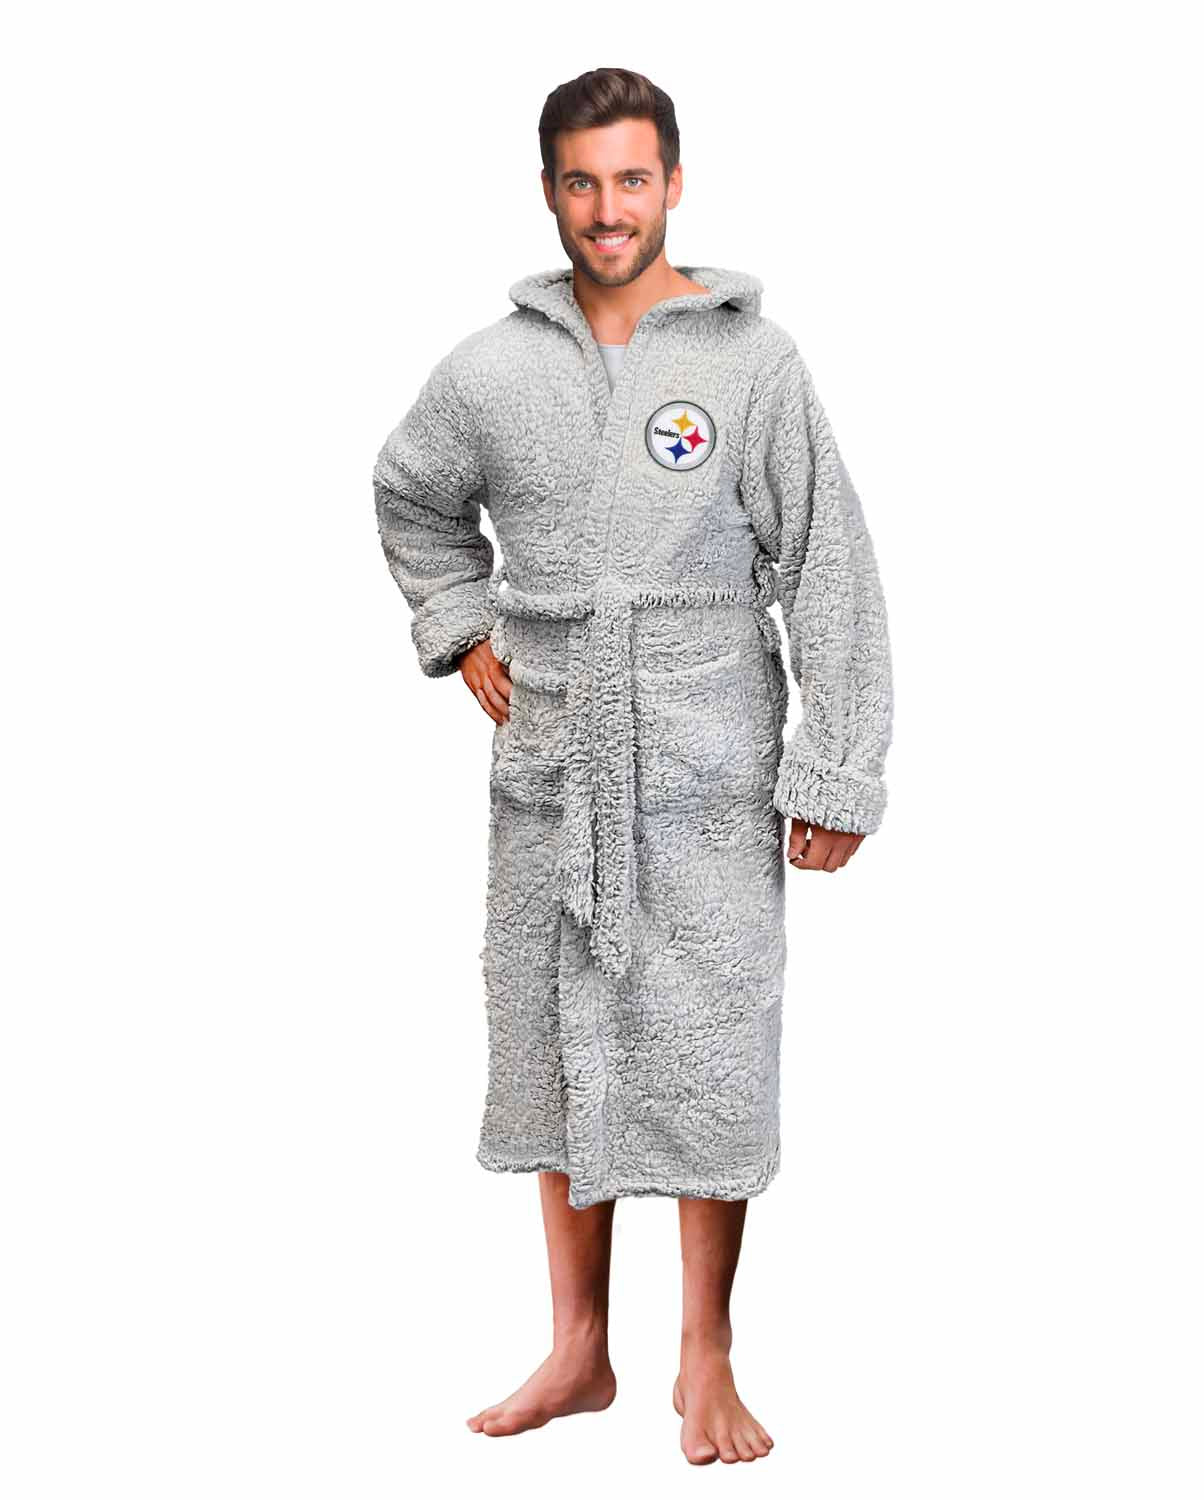 Pittsburgh Steelers NFL Plush Hooded Robe with Pockets - Gray